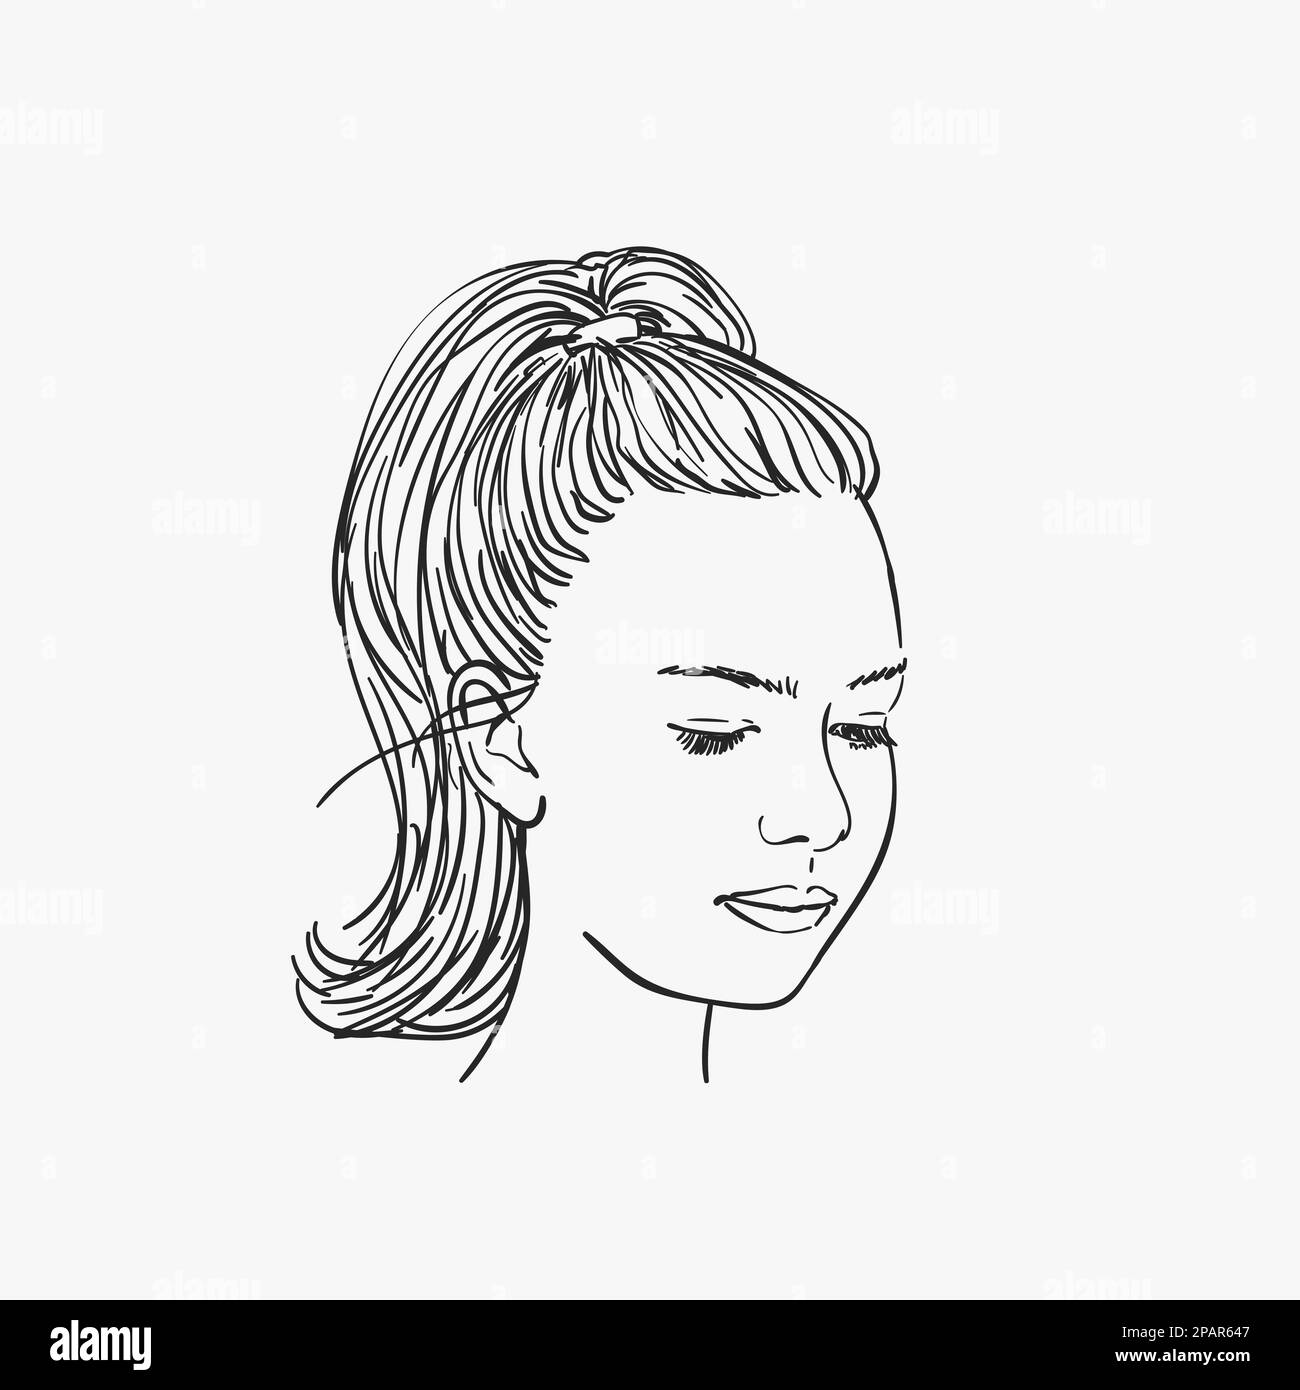 Sketch of girl's head serious eyes looking down, Hand drawn vector illustration Stock Vector